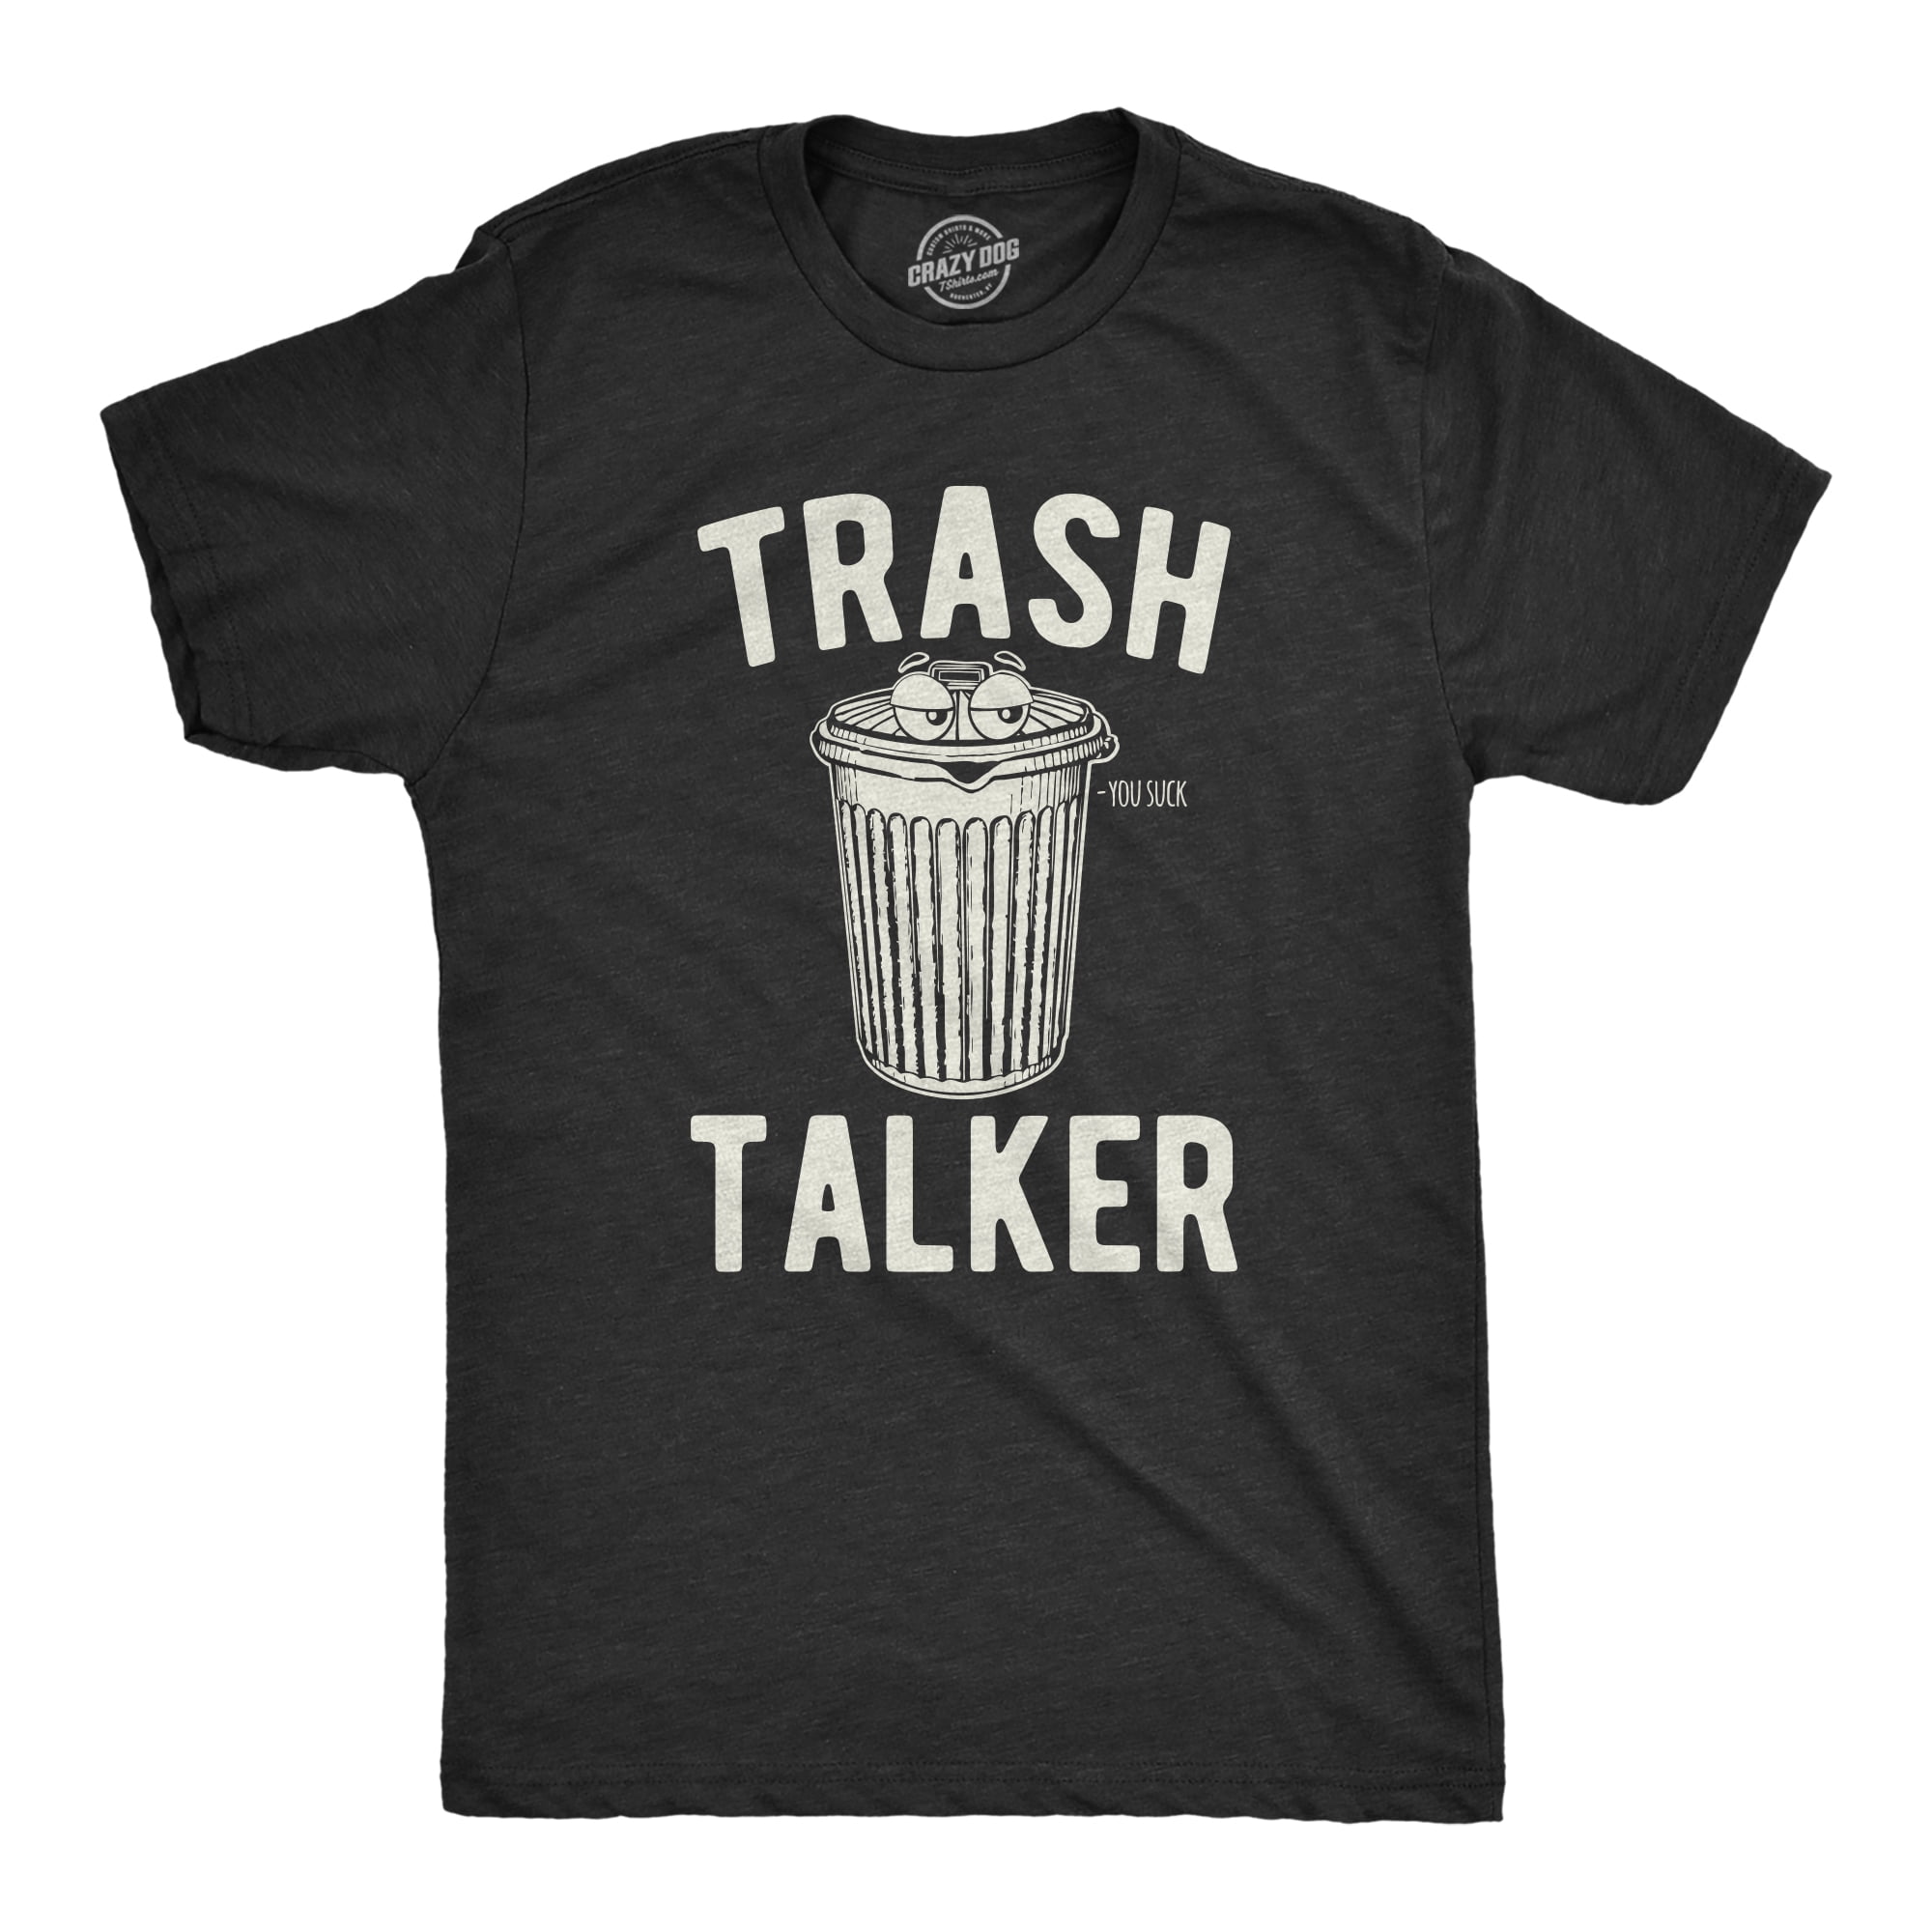 Mens Trash Talker T Shirt Funny Sarcastic Talking Garbage Can Graphic  Novelty Tee For Guys (Heather Black - TRASH) - S Graphic Tees